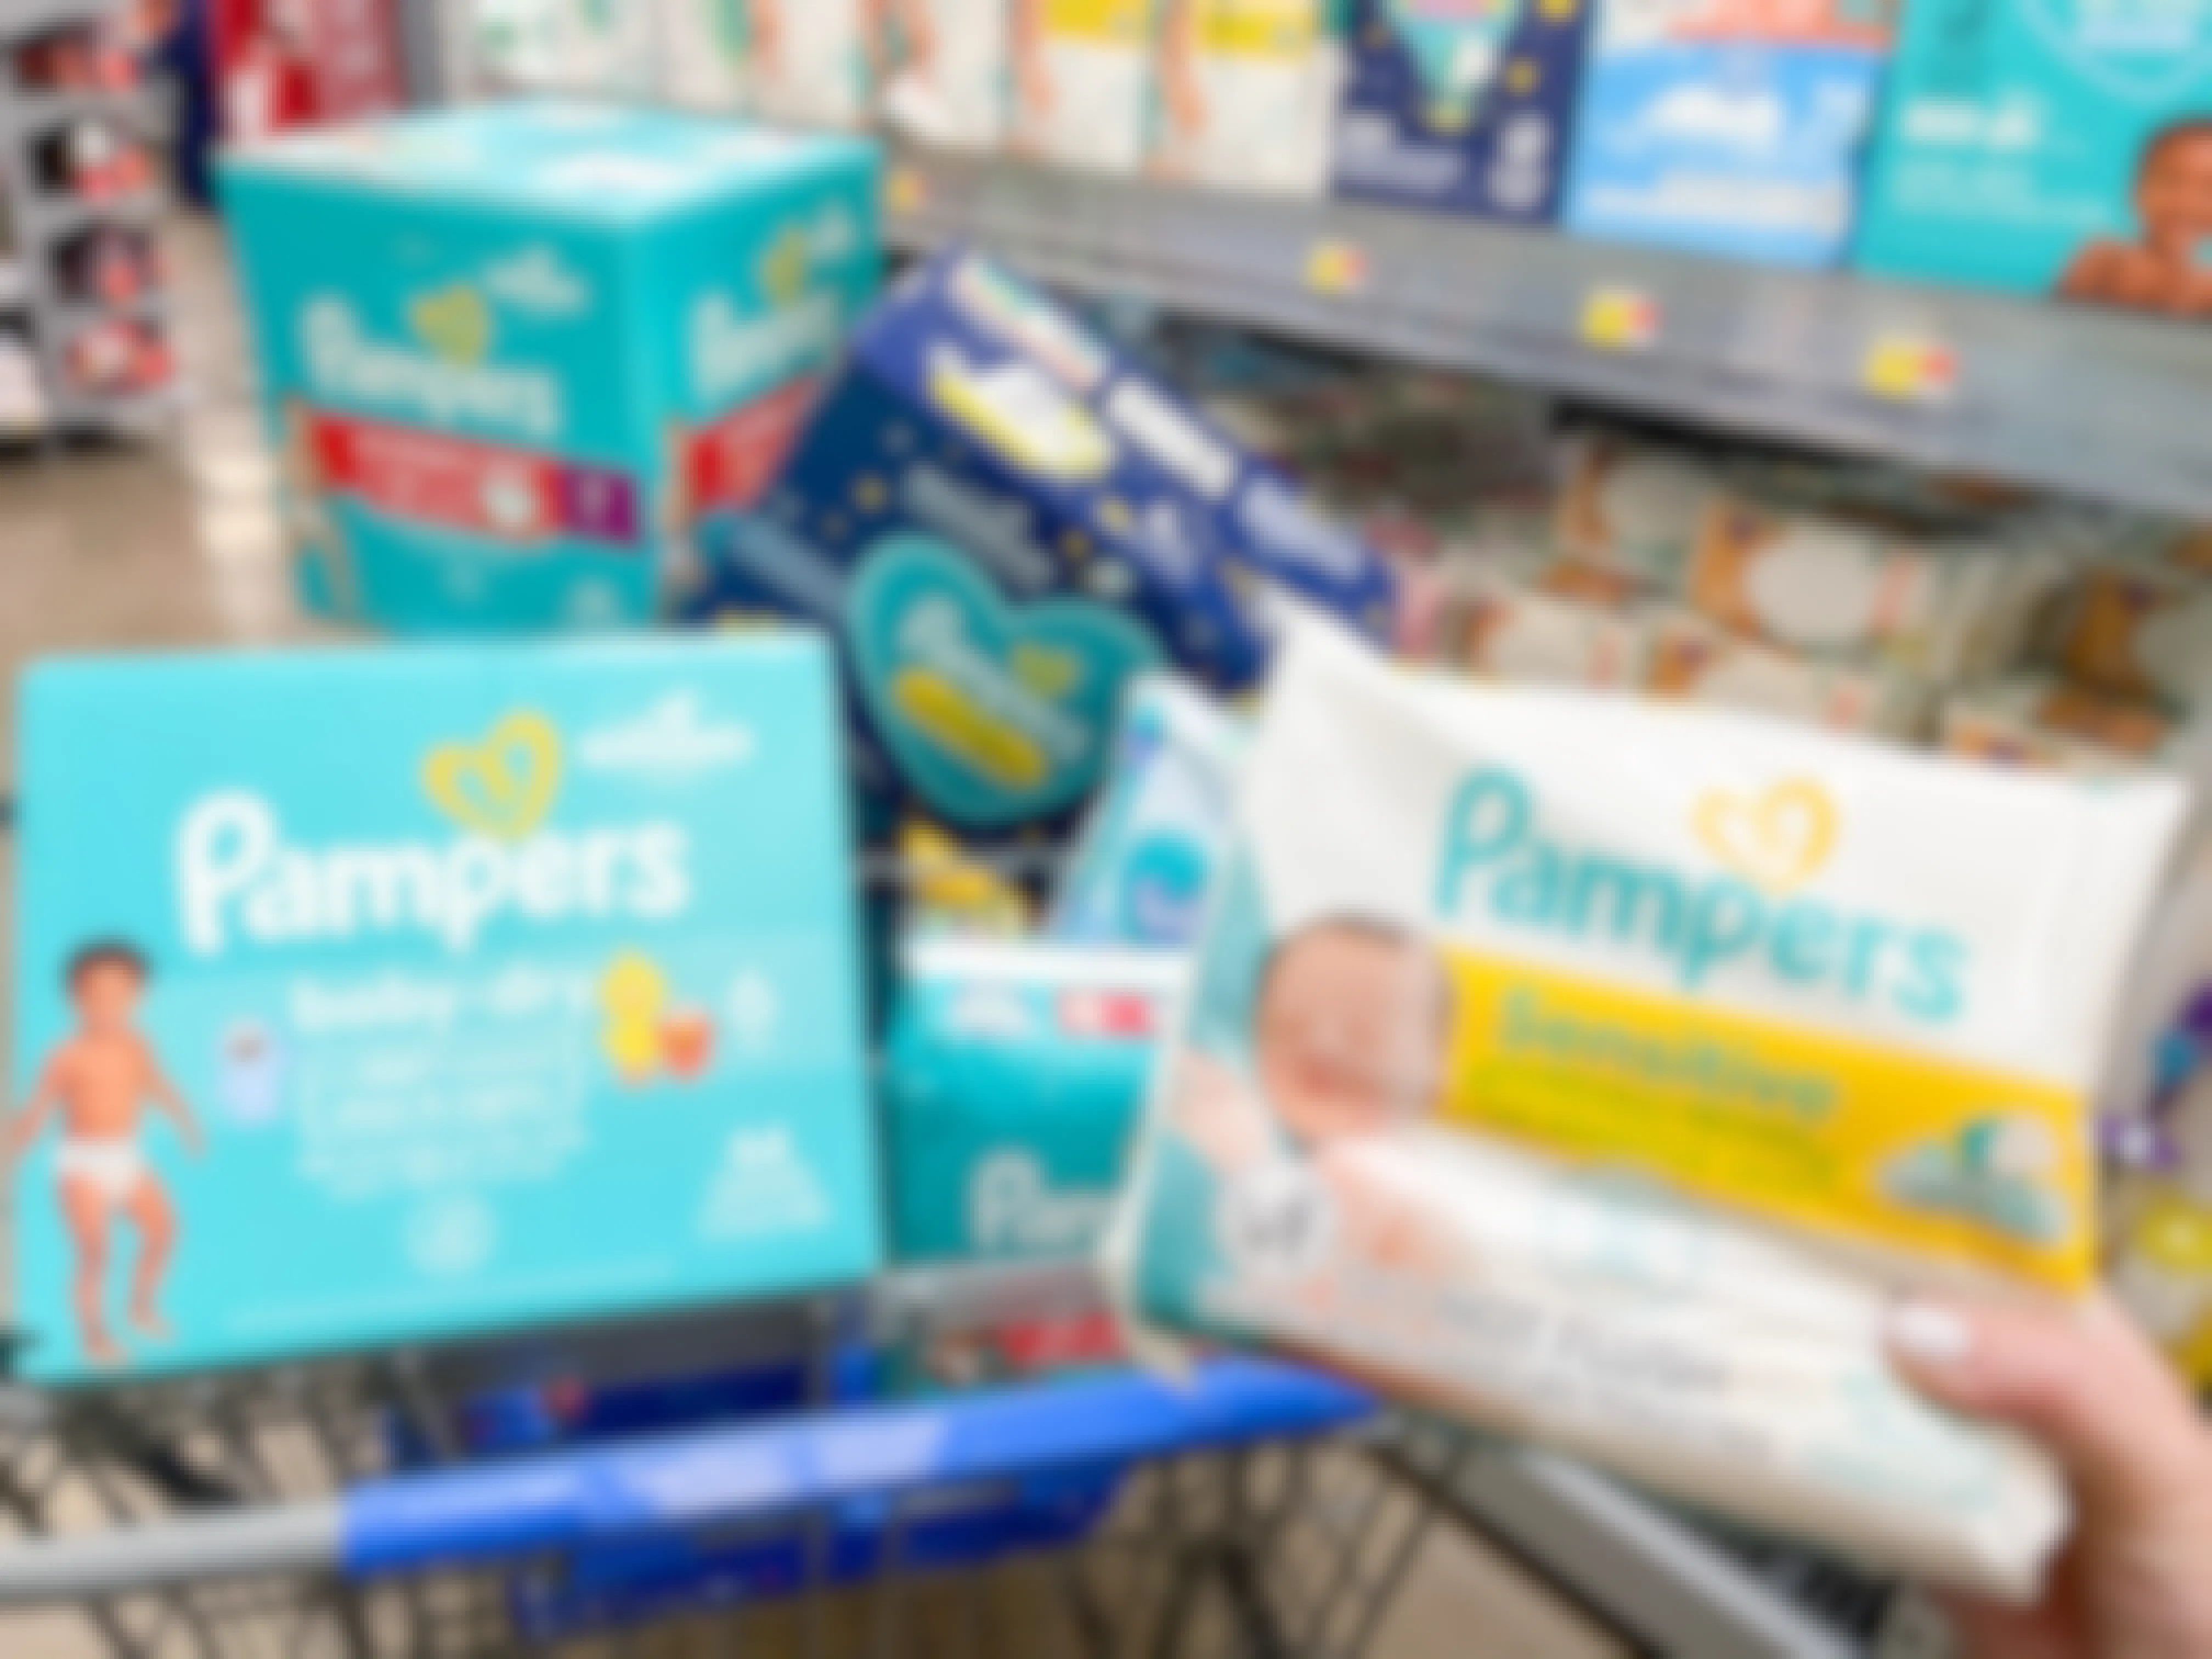 a cart filled with boxes of pampers diapers and wipes being held